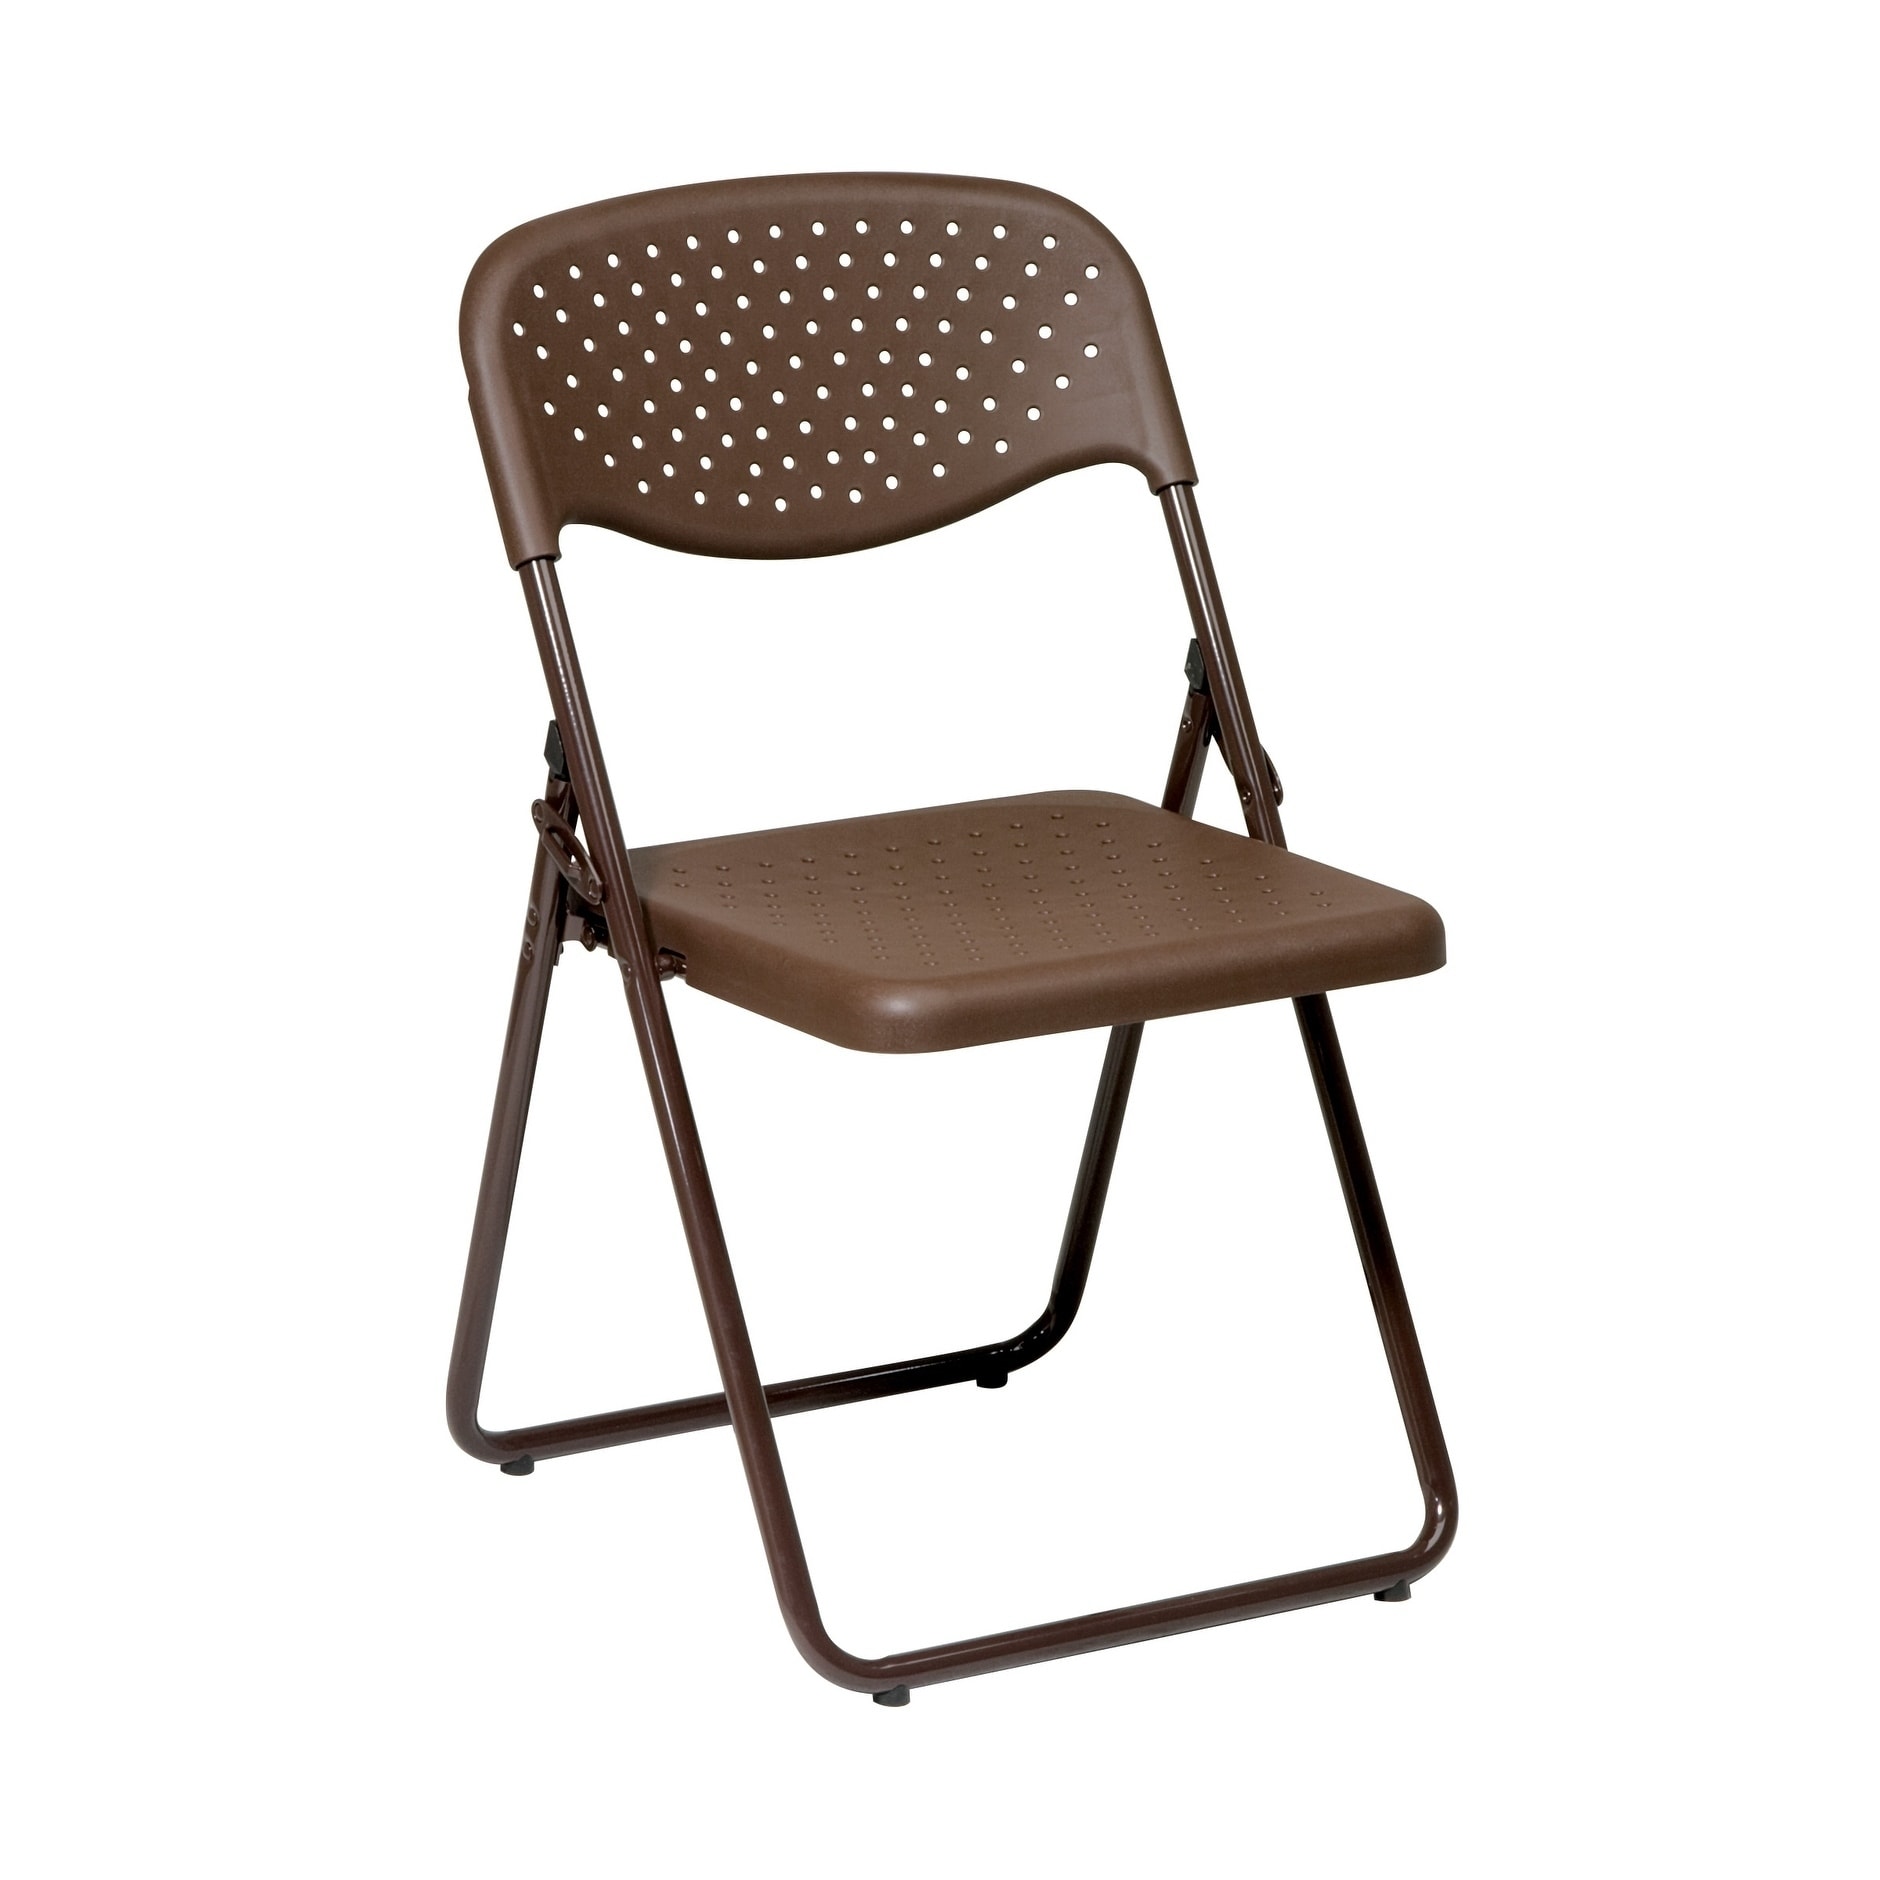 Office Star Products Work Smart Contemporary Brown Metal Plastic Folding Visitor Chair 22b75331 2d43 4771 Aab4 64baa0fd10ca 